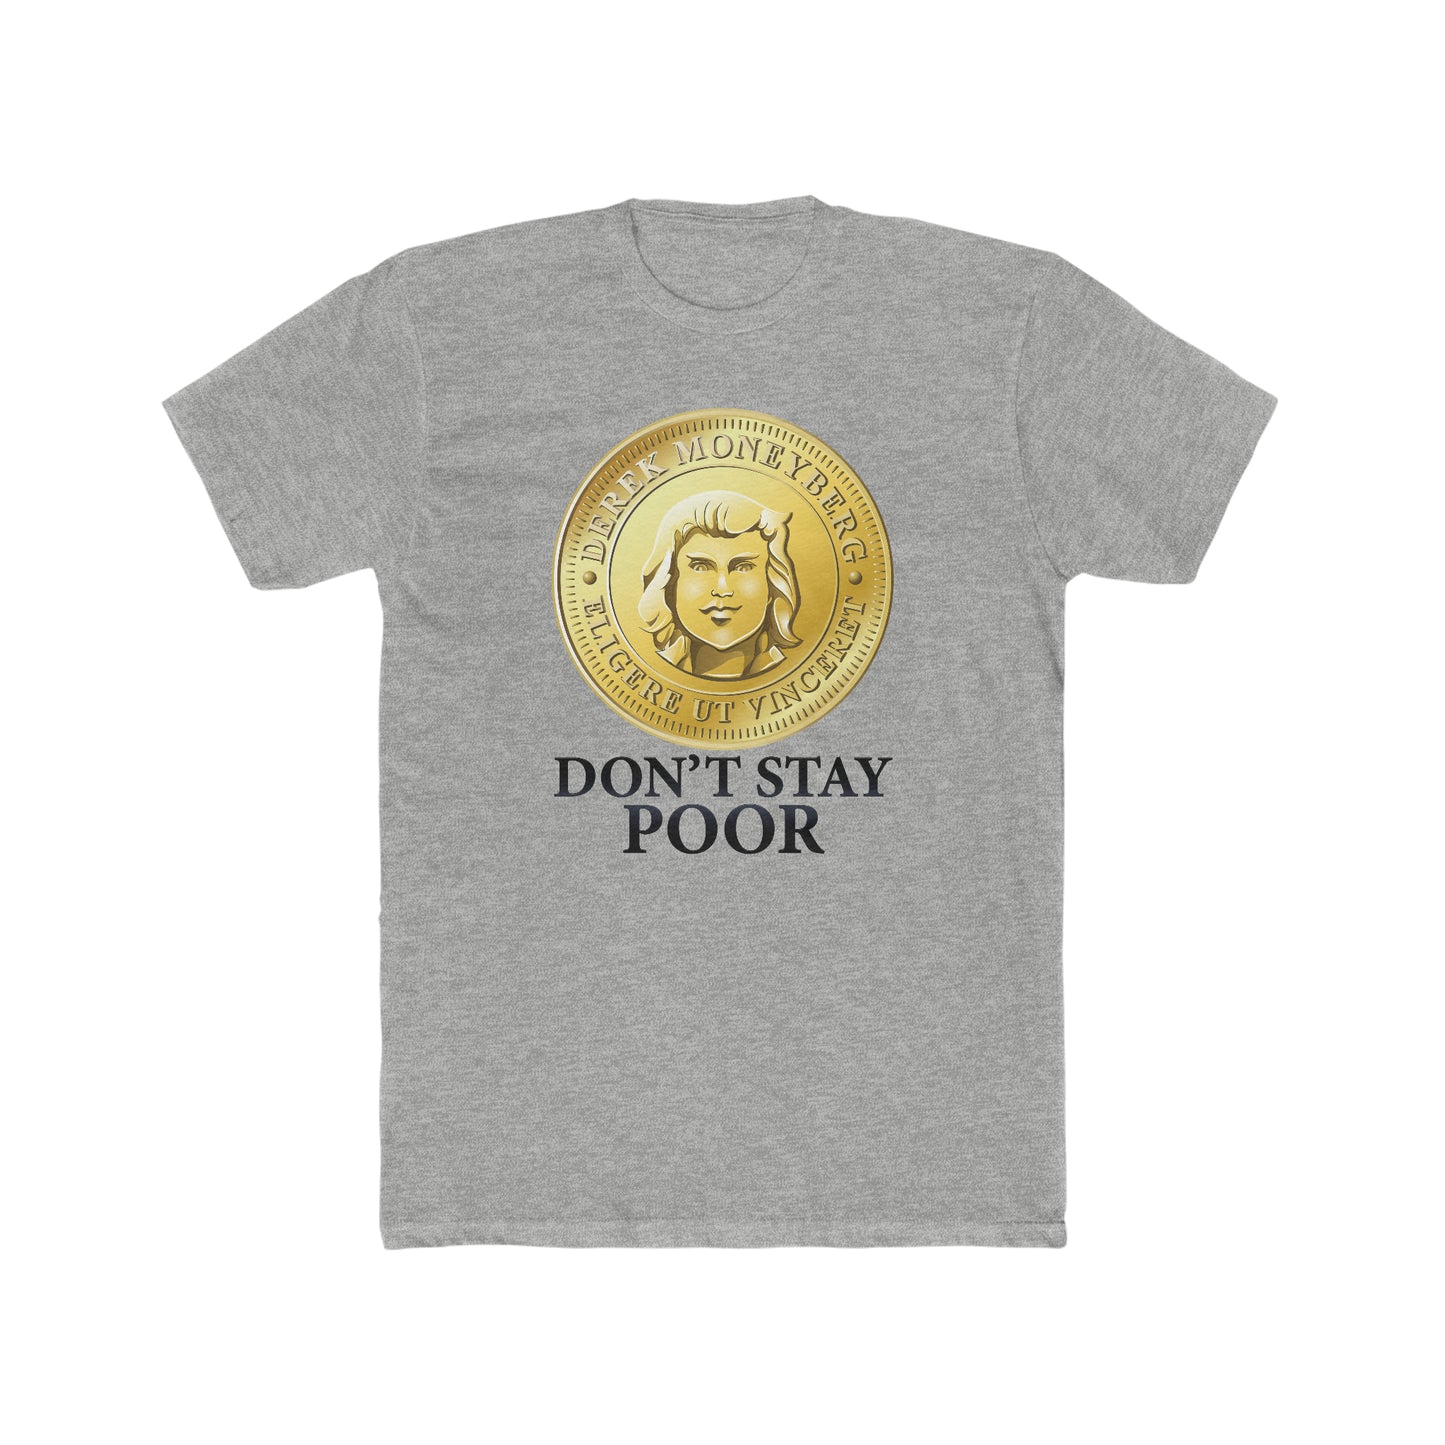 Crewneck T-Shirt - Don't Stay Poor Coin